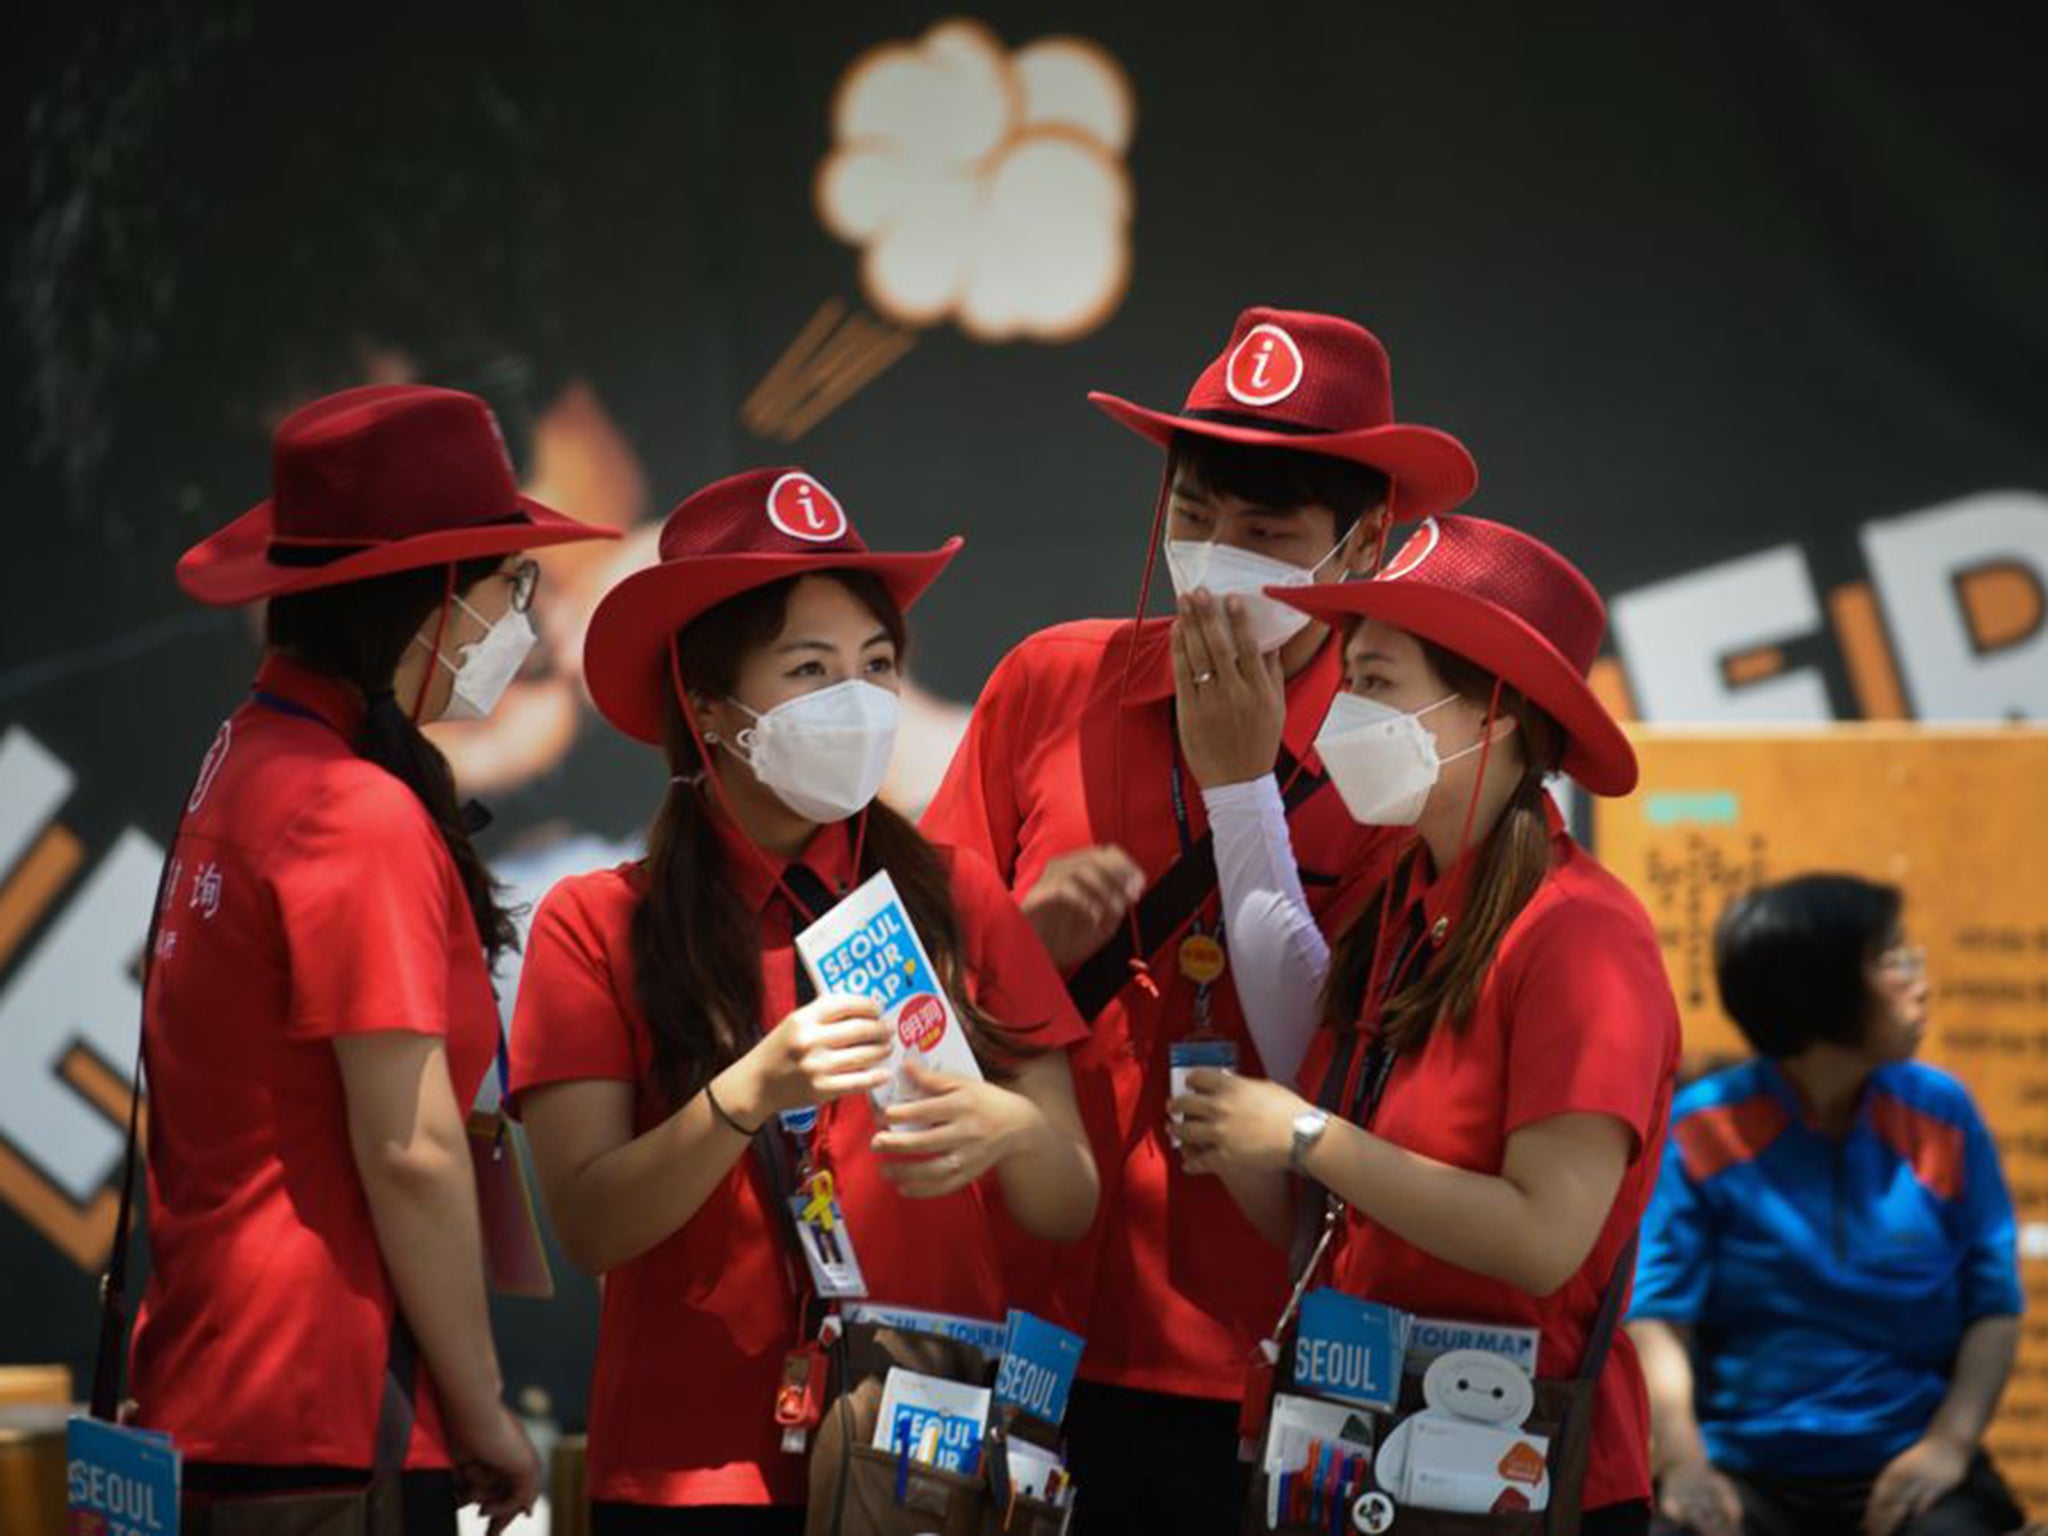 Volunteer tourist assistants in Seoul are attempting to reassure foreign visitors amid reports that 7,000 people – mostly from China – have cancelled planned trips to South Korea due to Mers